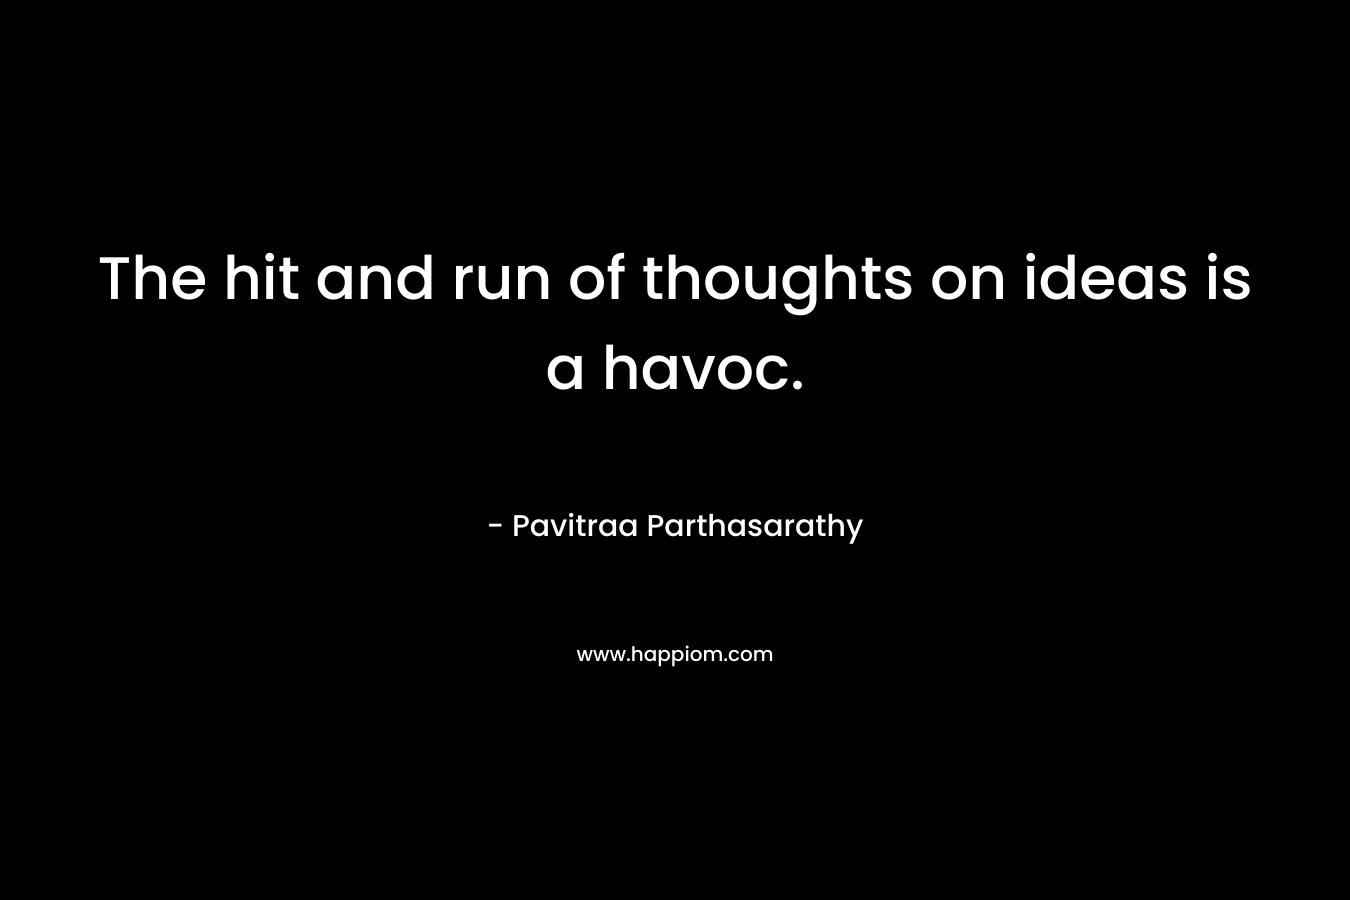 The hit and run of thoughts on ideas is a havoc. – Pavitraa Parthasarathy